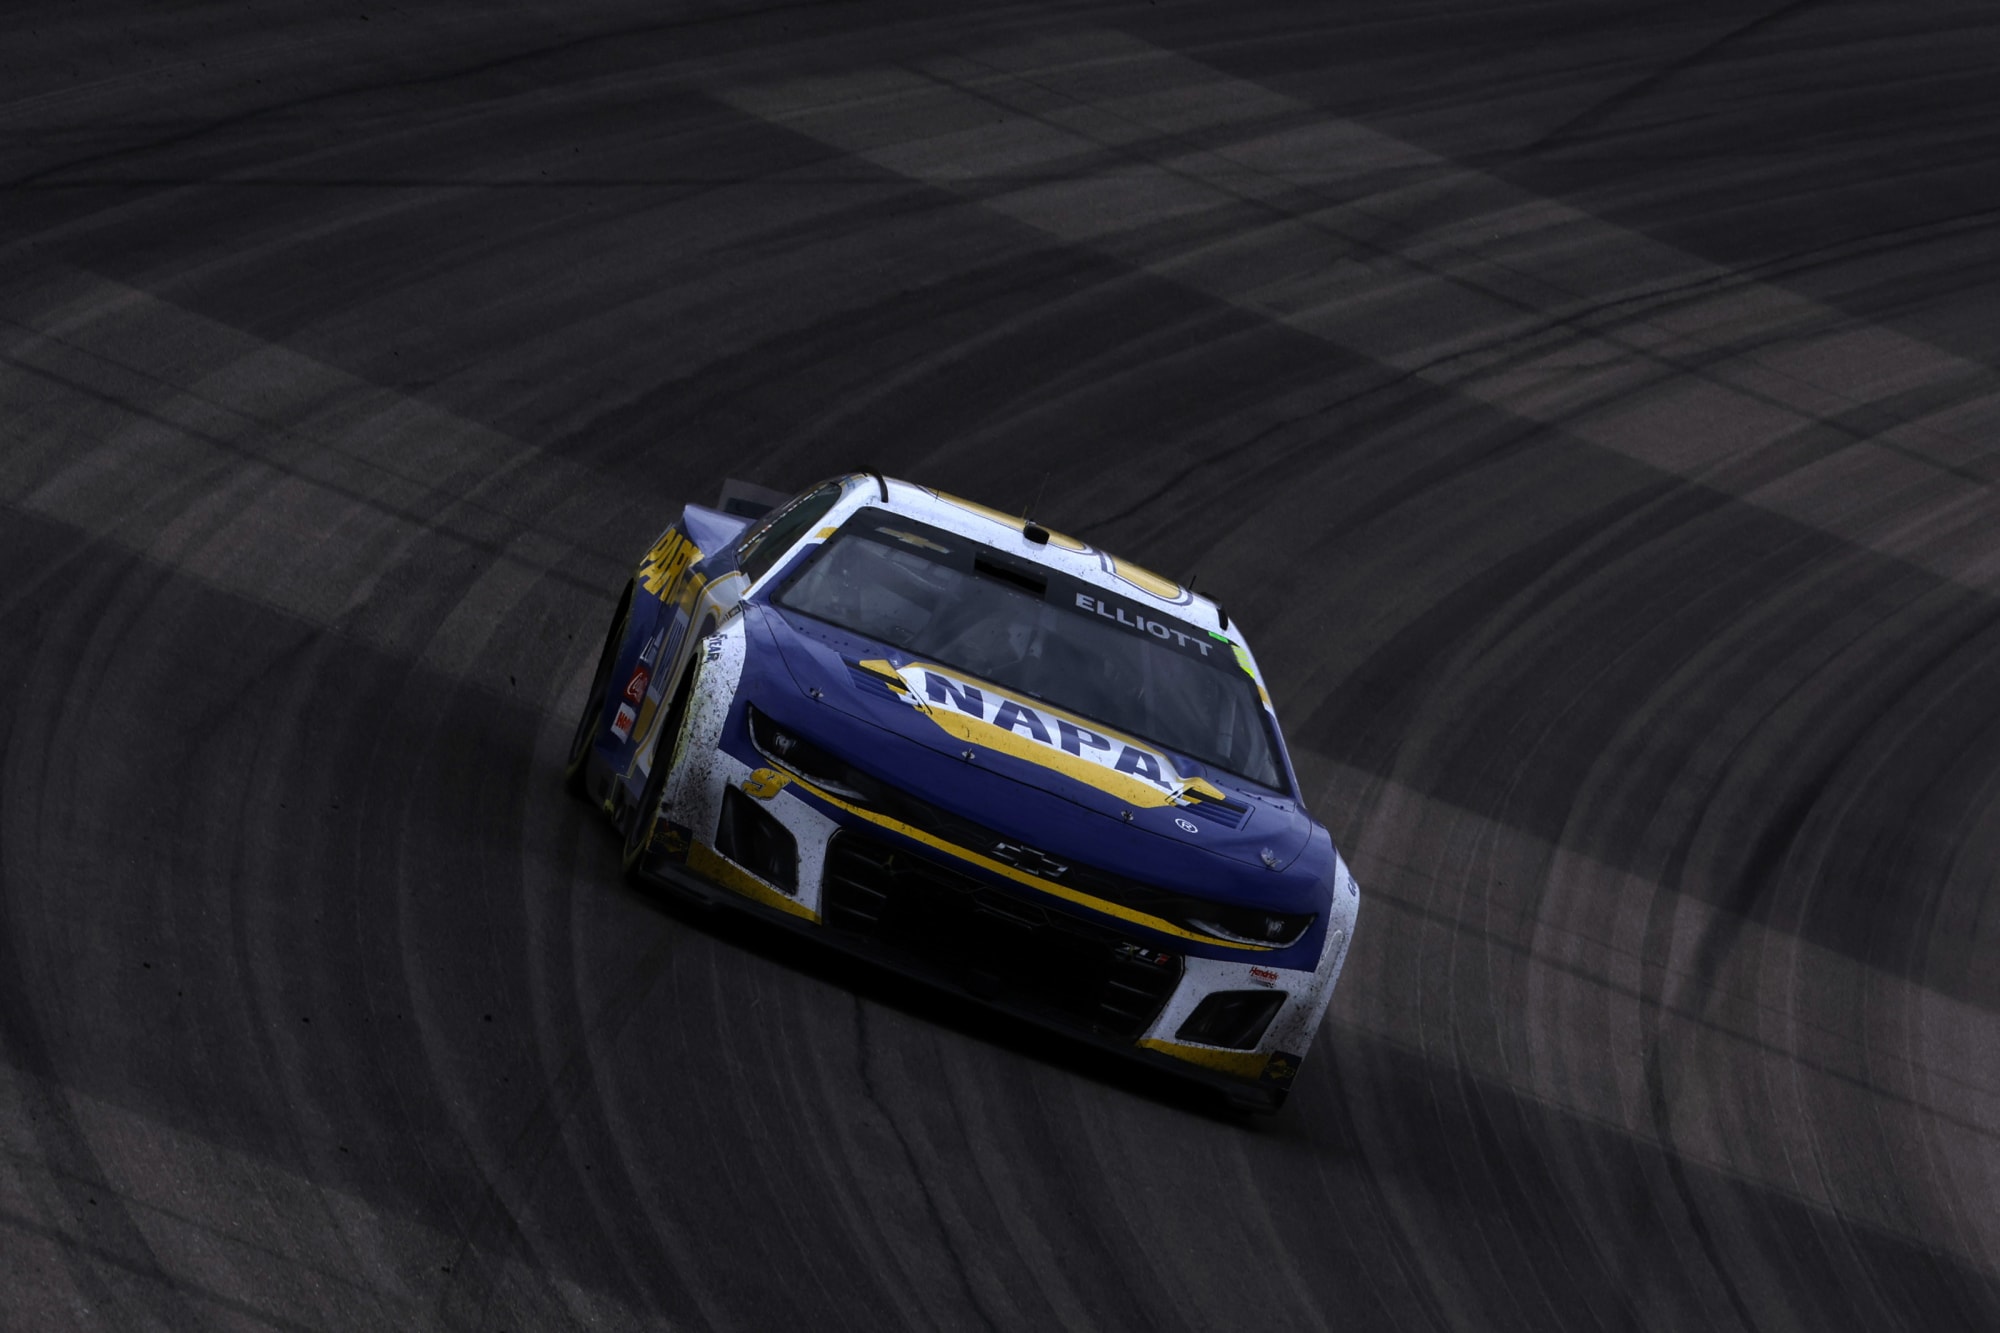 Chase Elliott Joey Logano testing whether Cup playoff experience matters   FOX Sports